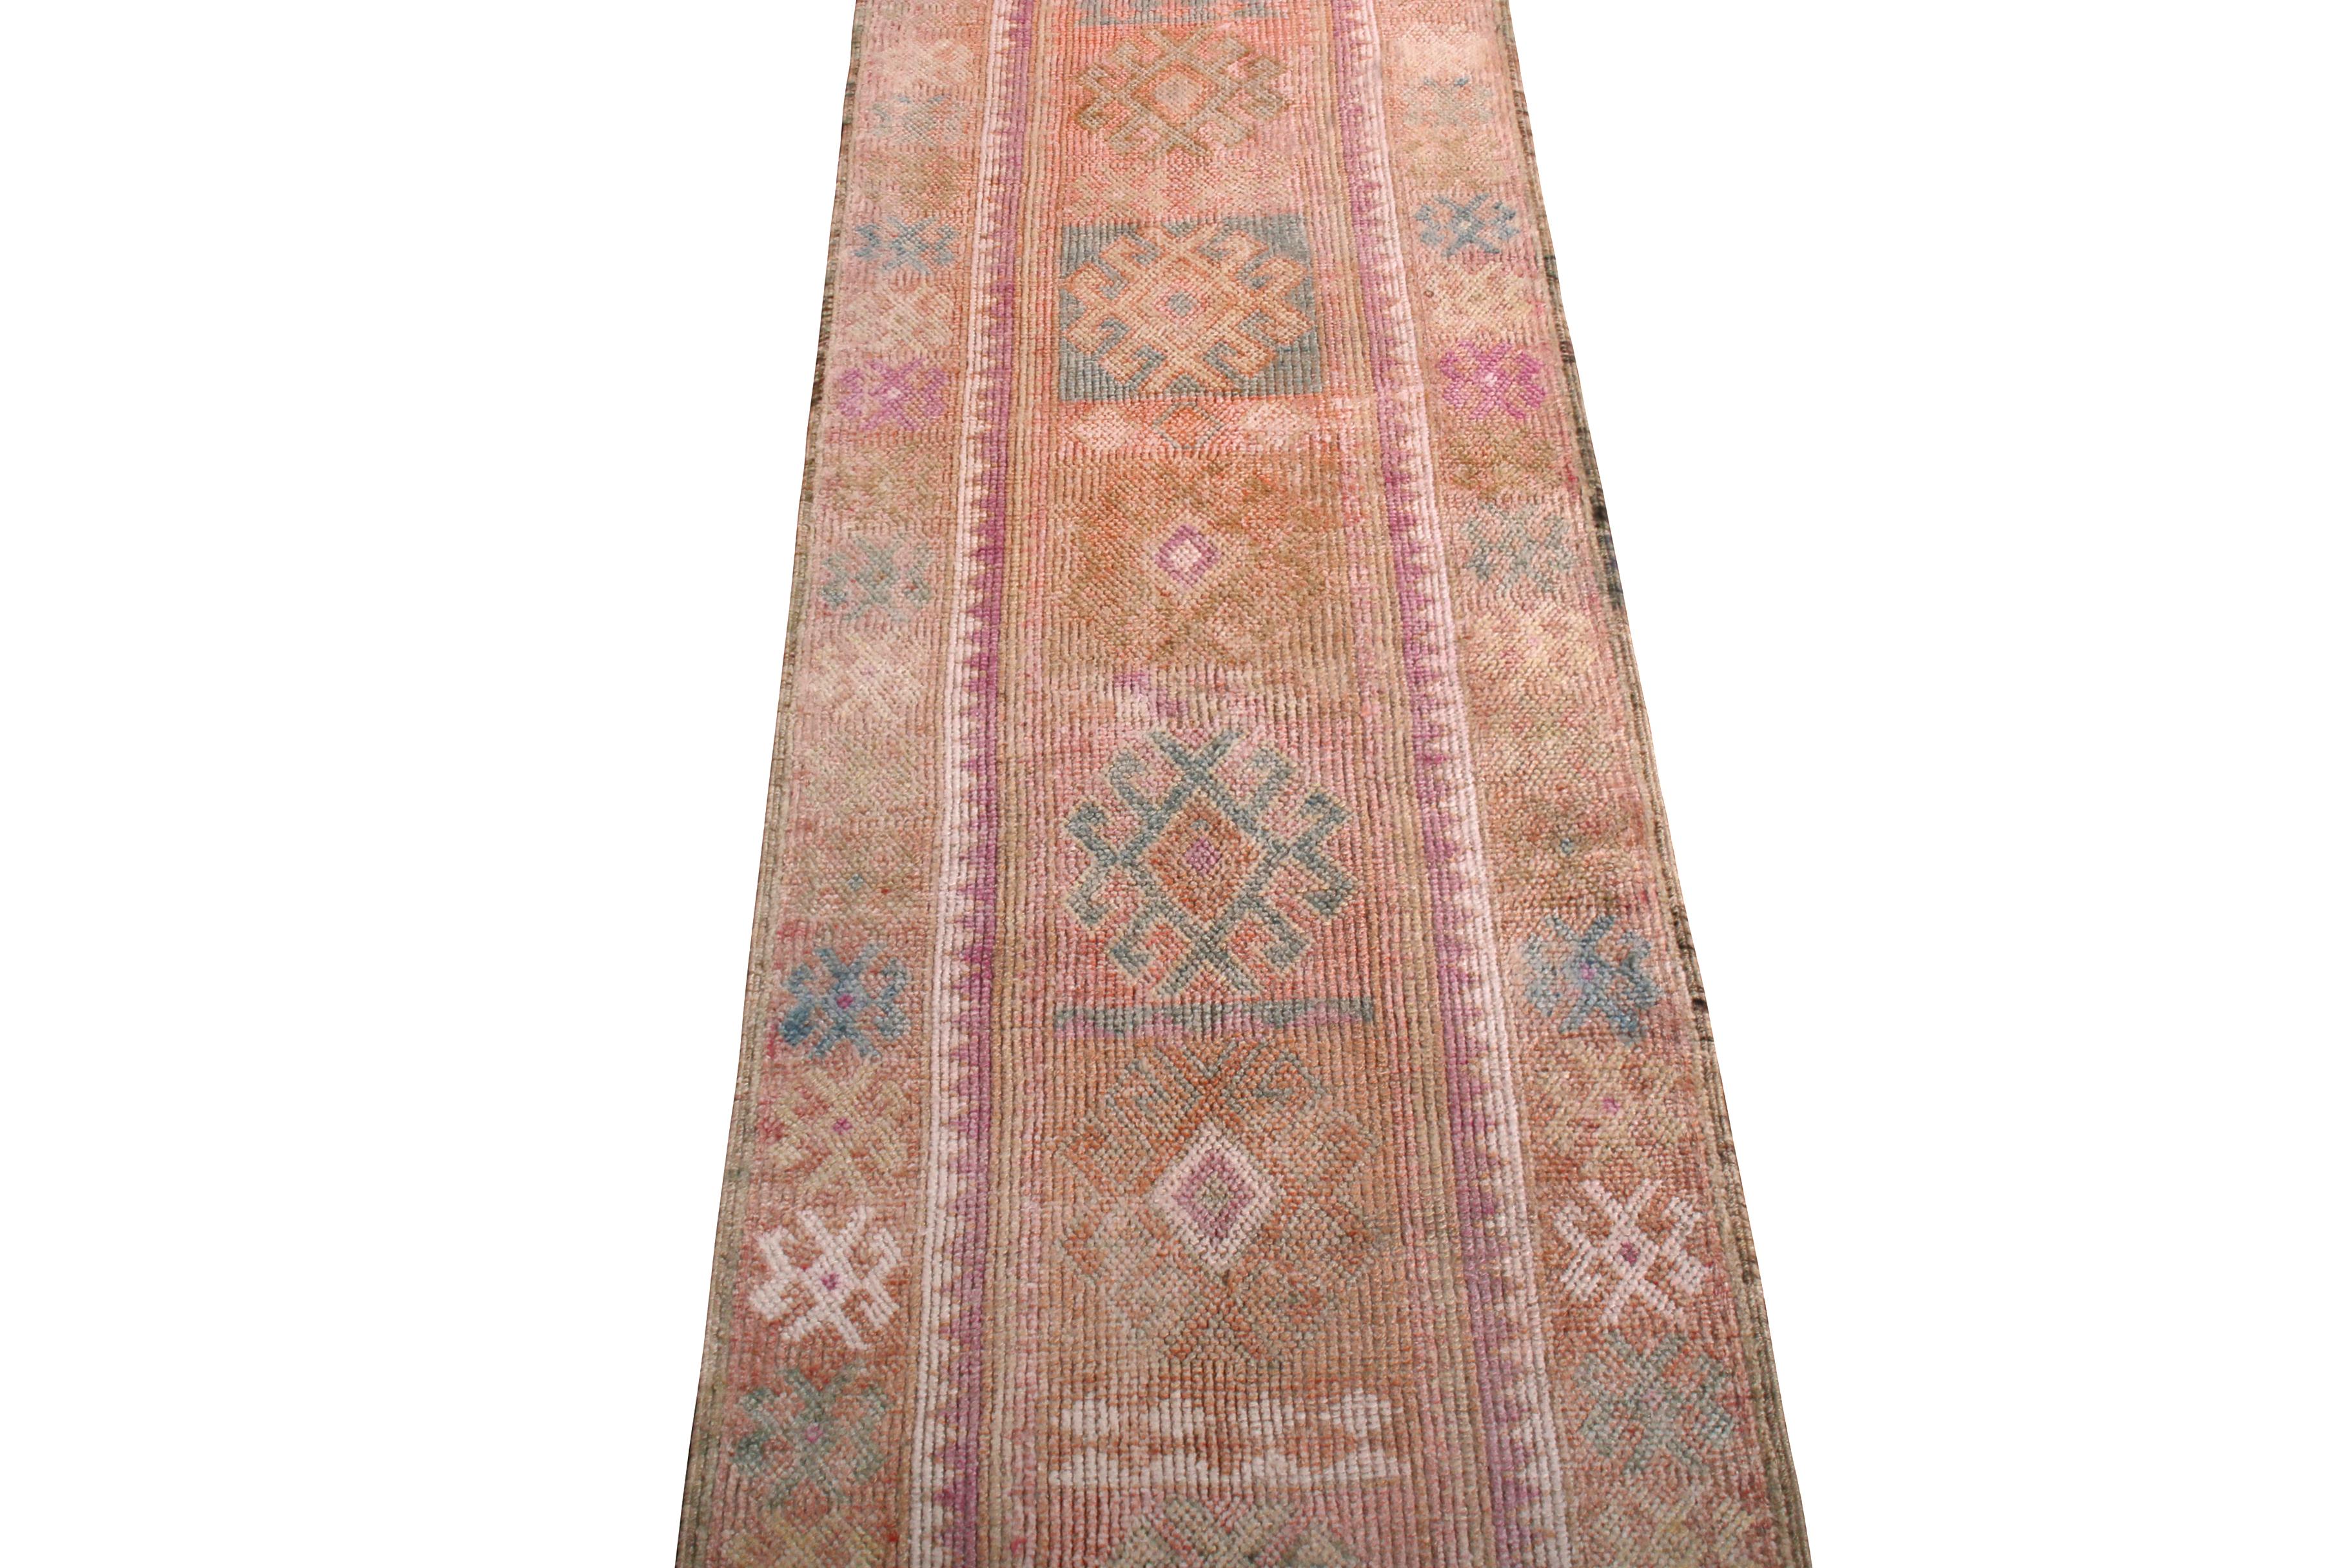 Hand knotted in wool originating from Turkey circa 1950-1960, this 3 x 12 runner connotes a vintage tribal rug design of notable size, a textural weave, and a distinctive warm colorway—playing orange and pink hues against beige brown in a lively,